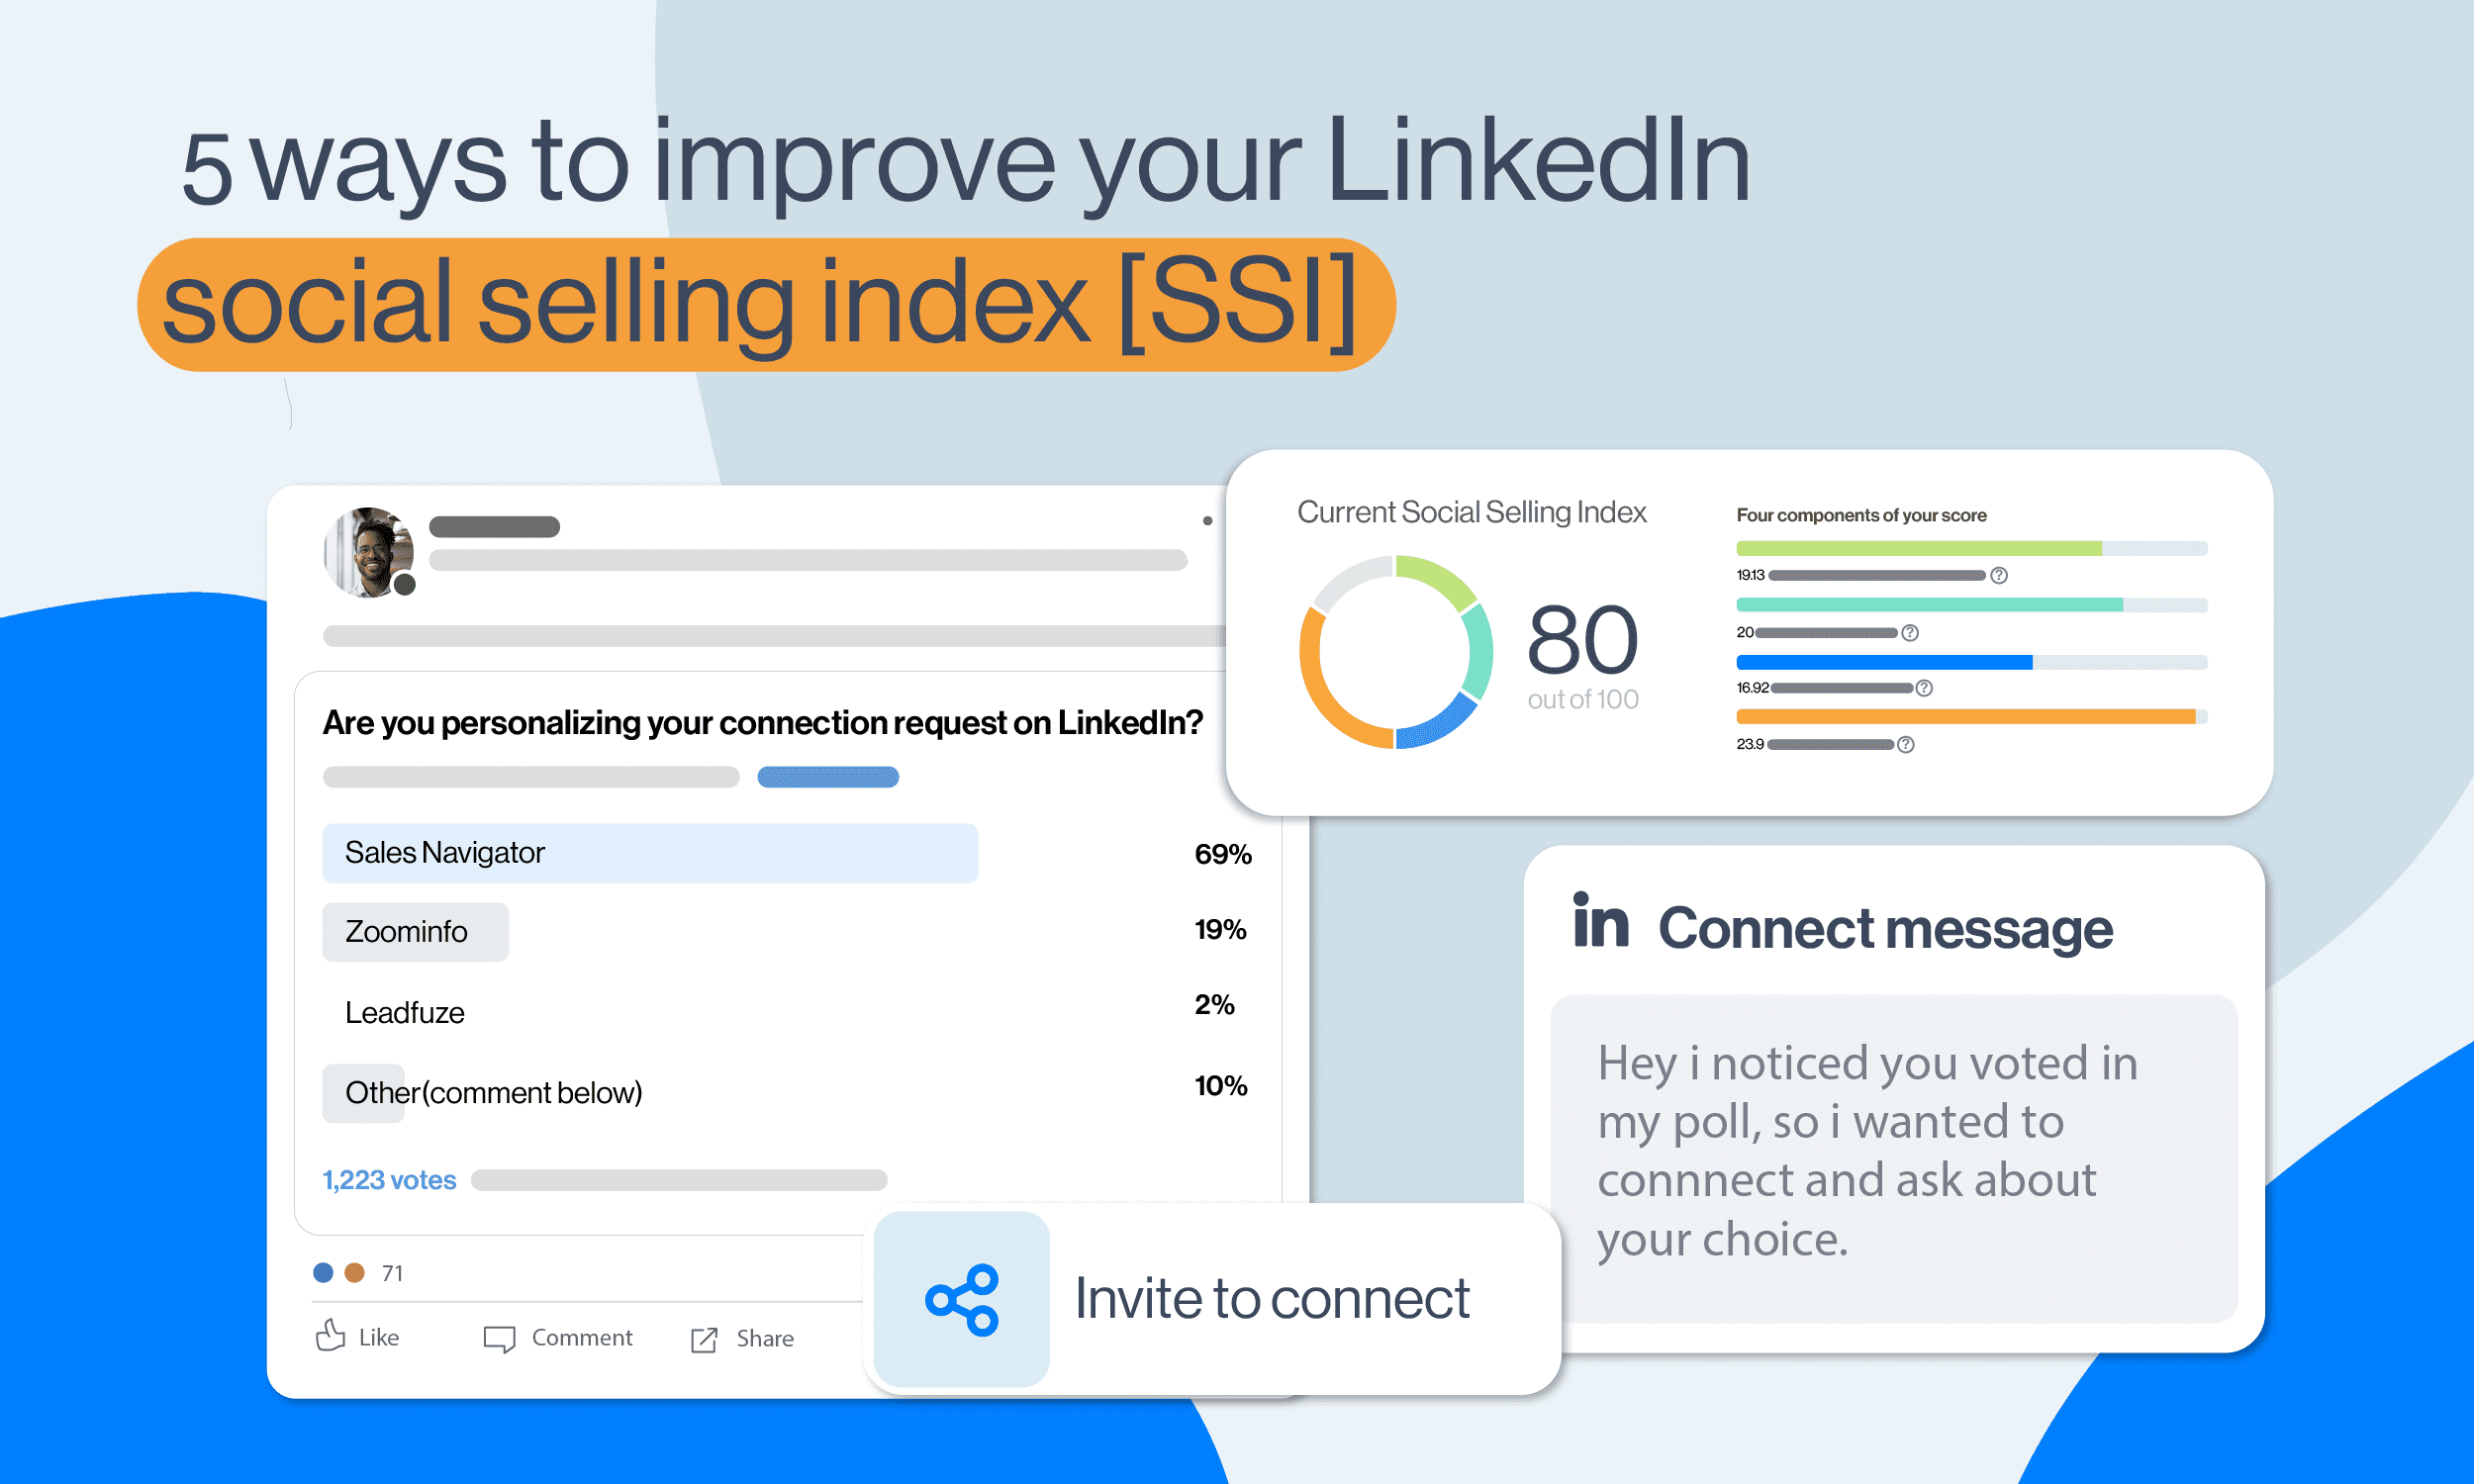 5 ways to increase LinkedIn SSI score cover image